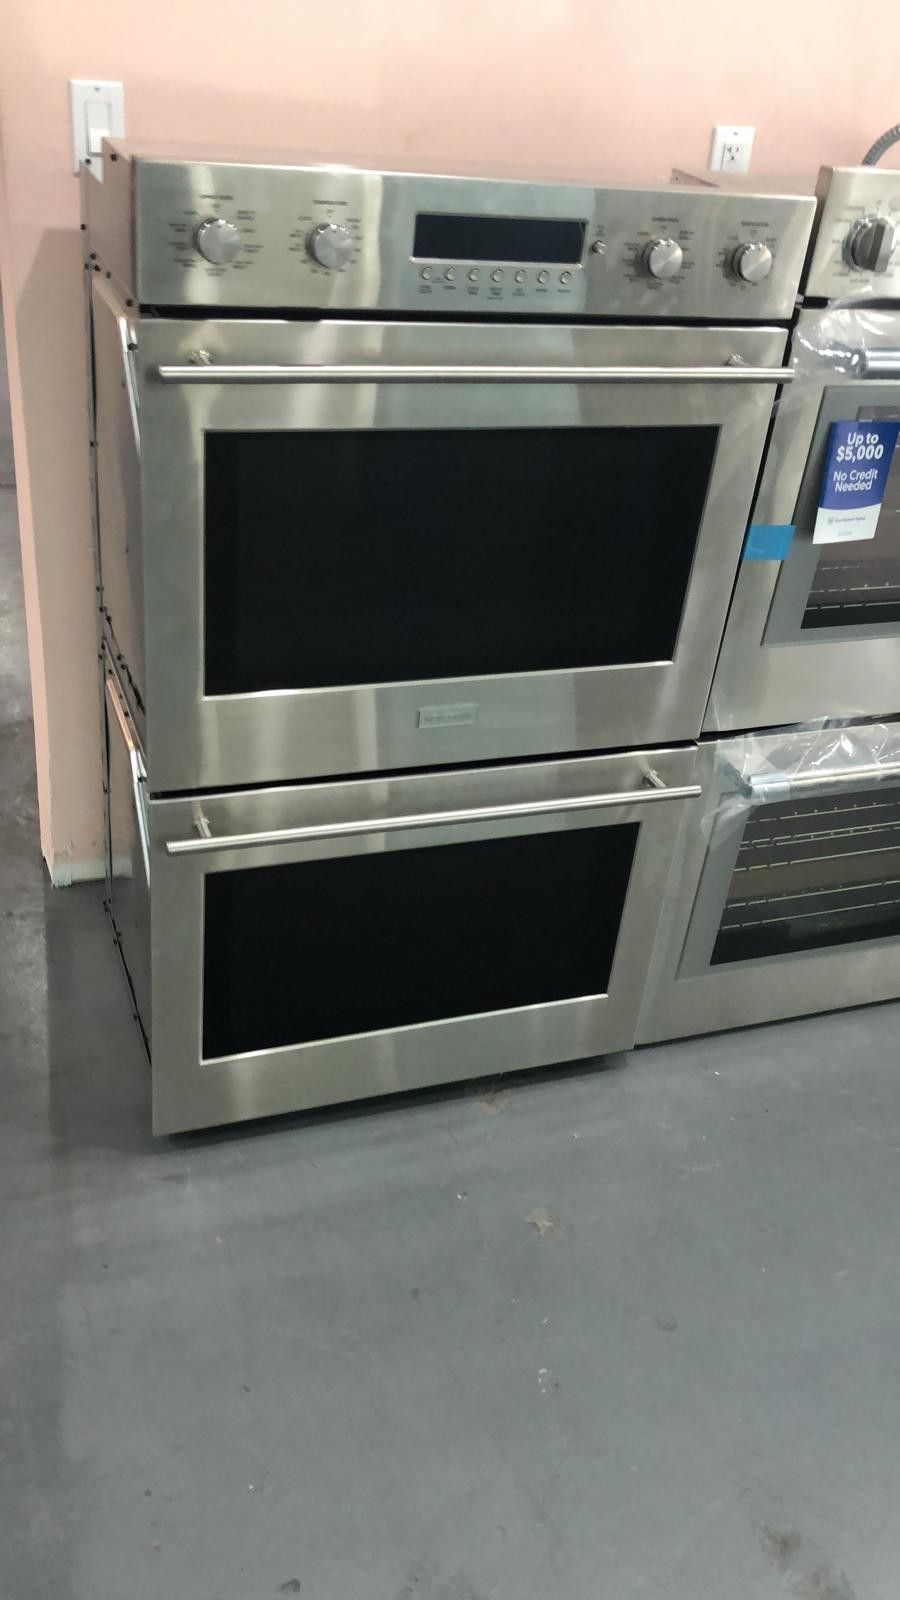 (55) New 30" Stainless Steel Double Wallpaper Oven 🔥 EzFinancing 39$ Down - No Credit Needed!